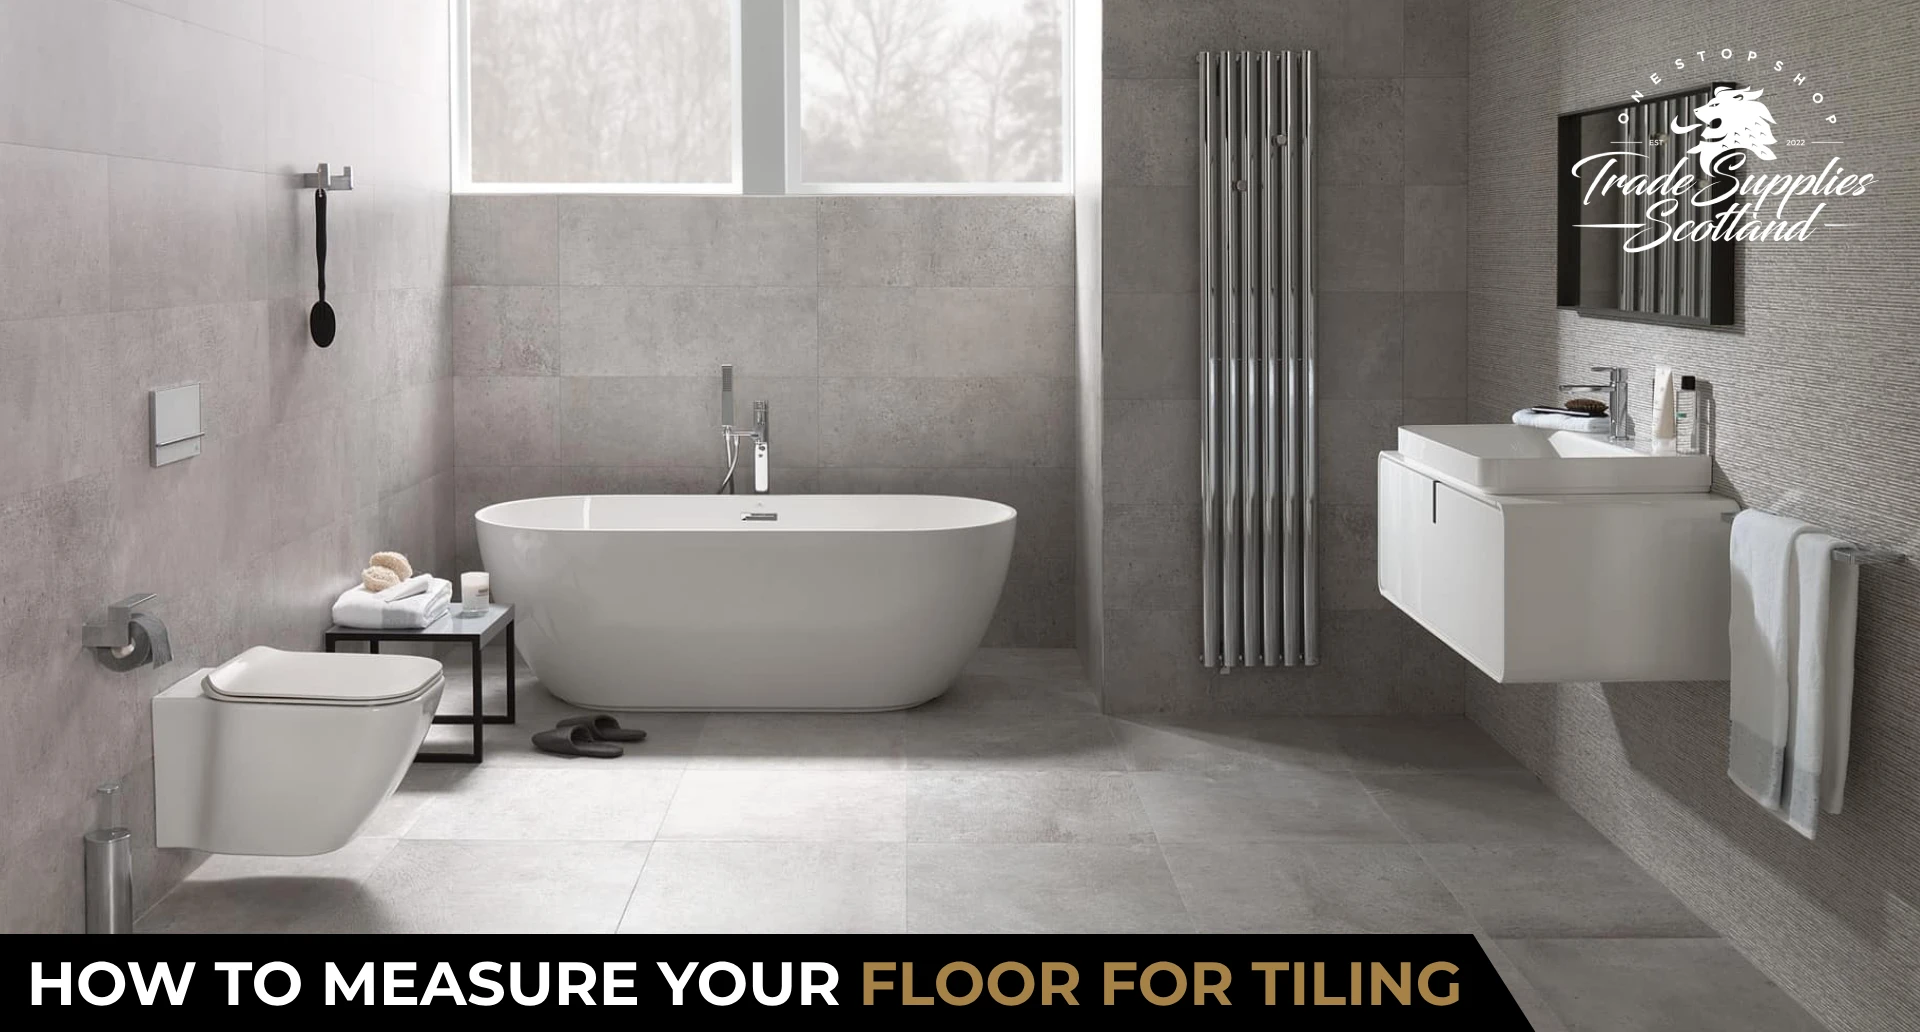 How to measure your floor for tiling